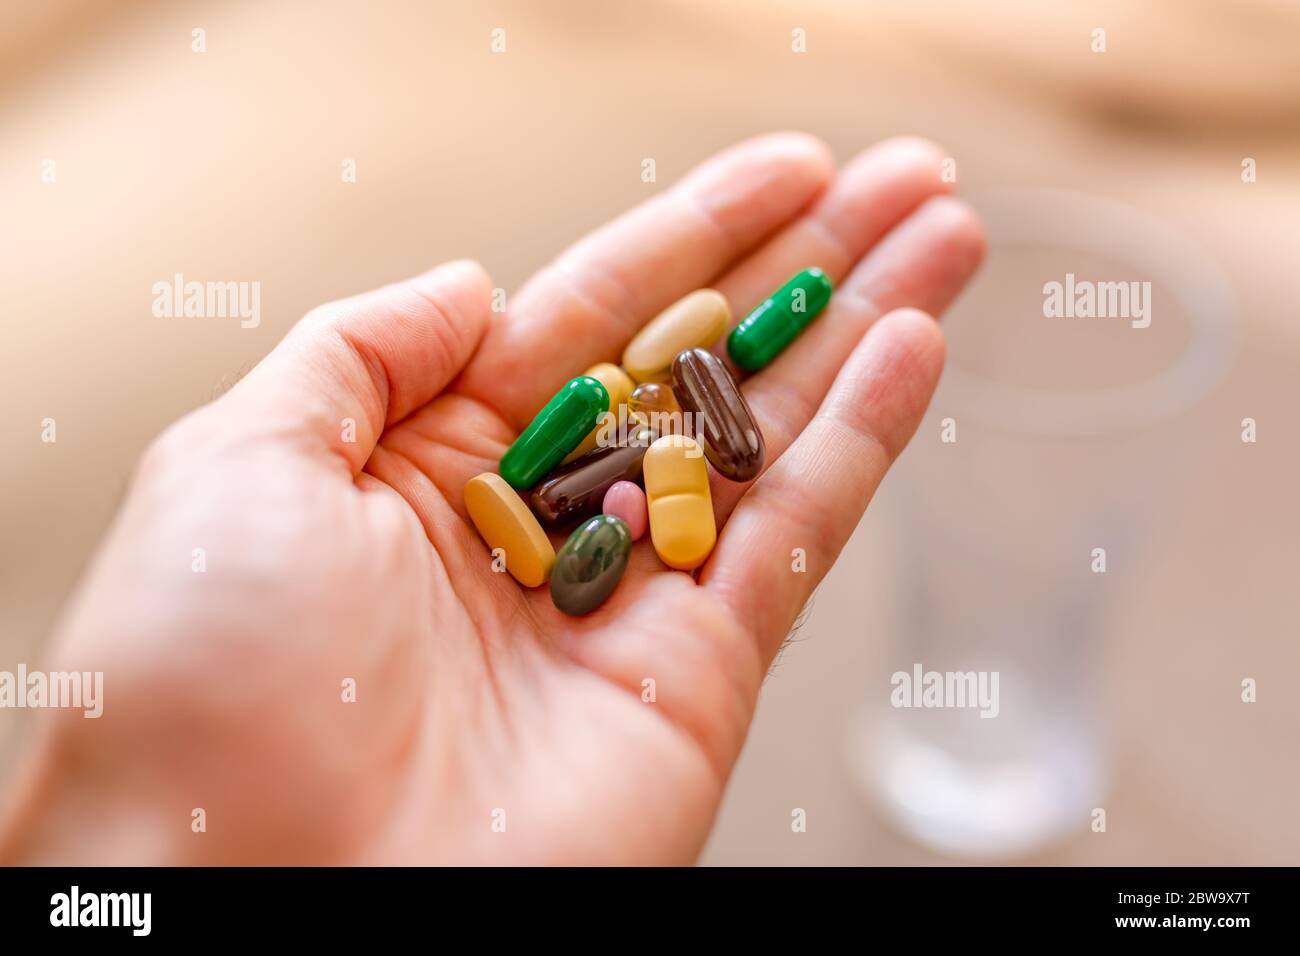 Immune system boost with vitamins. Colorful pharmaceutical medicine pills, narcotic drugs and vitamin in capsules on palm. Copy space for text. Stock Photo